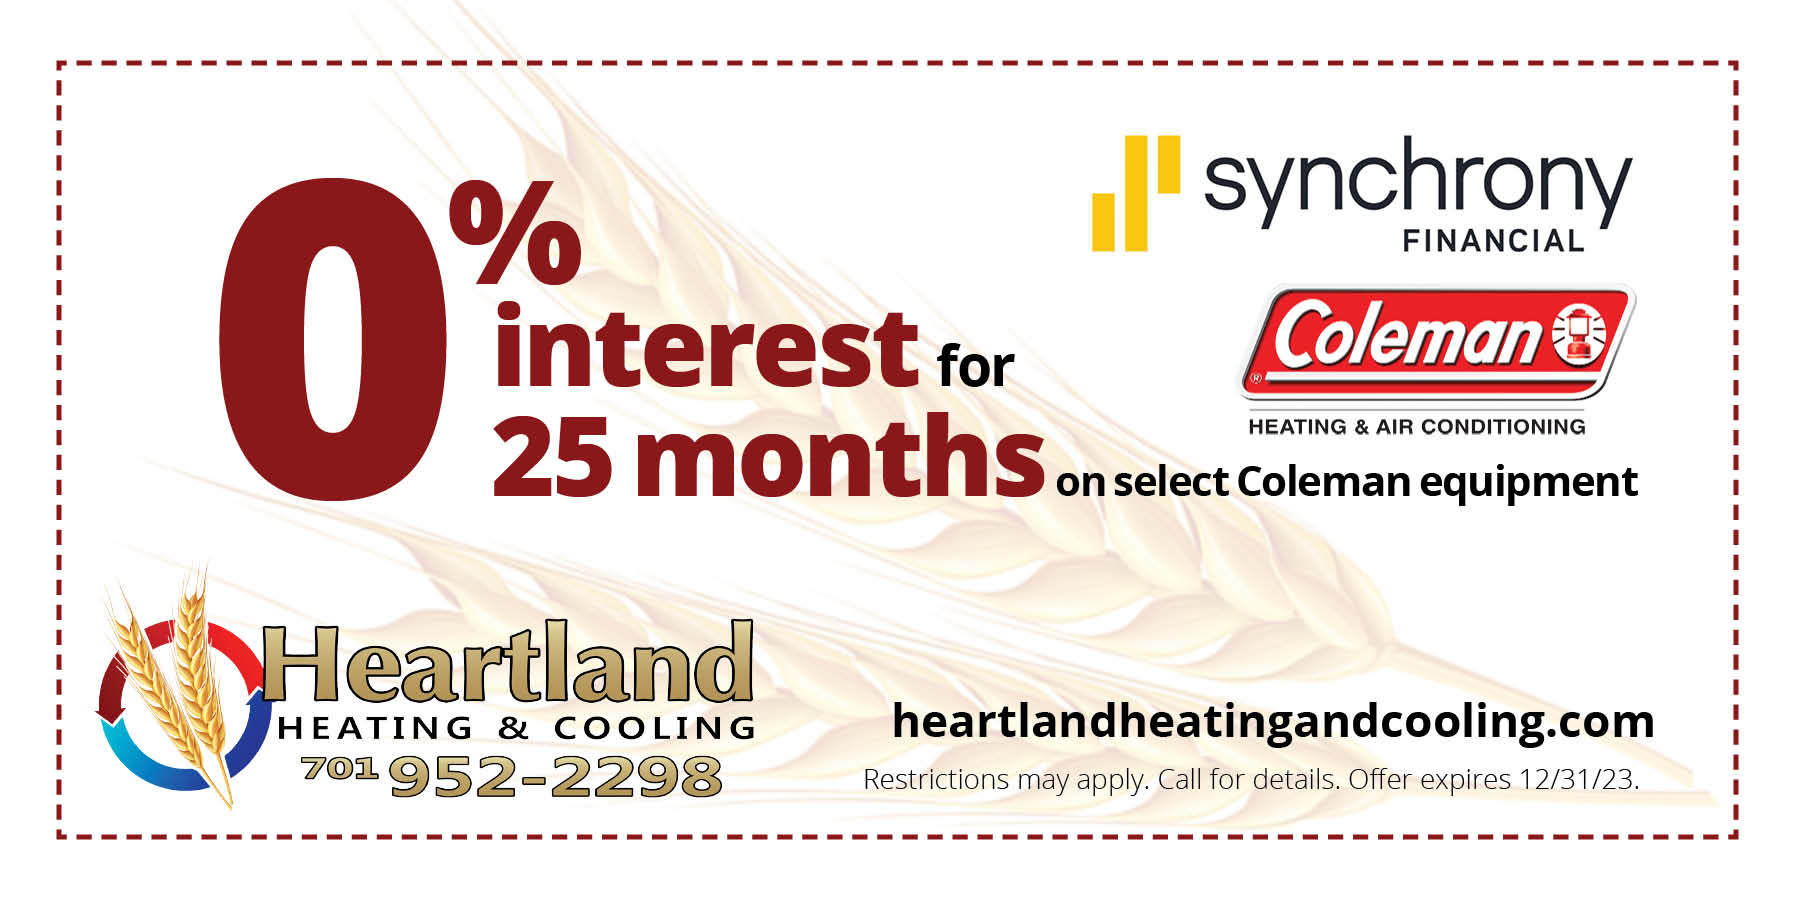 0% interest for 25 months on select Coleman equipment.